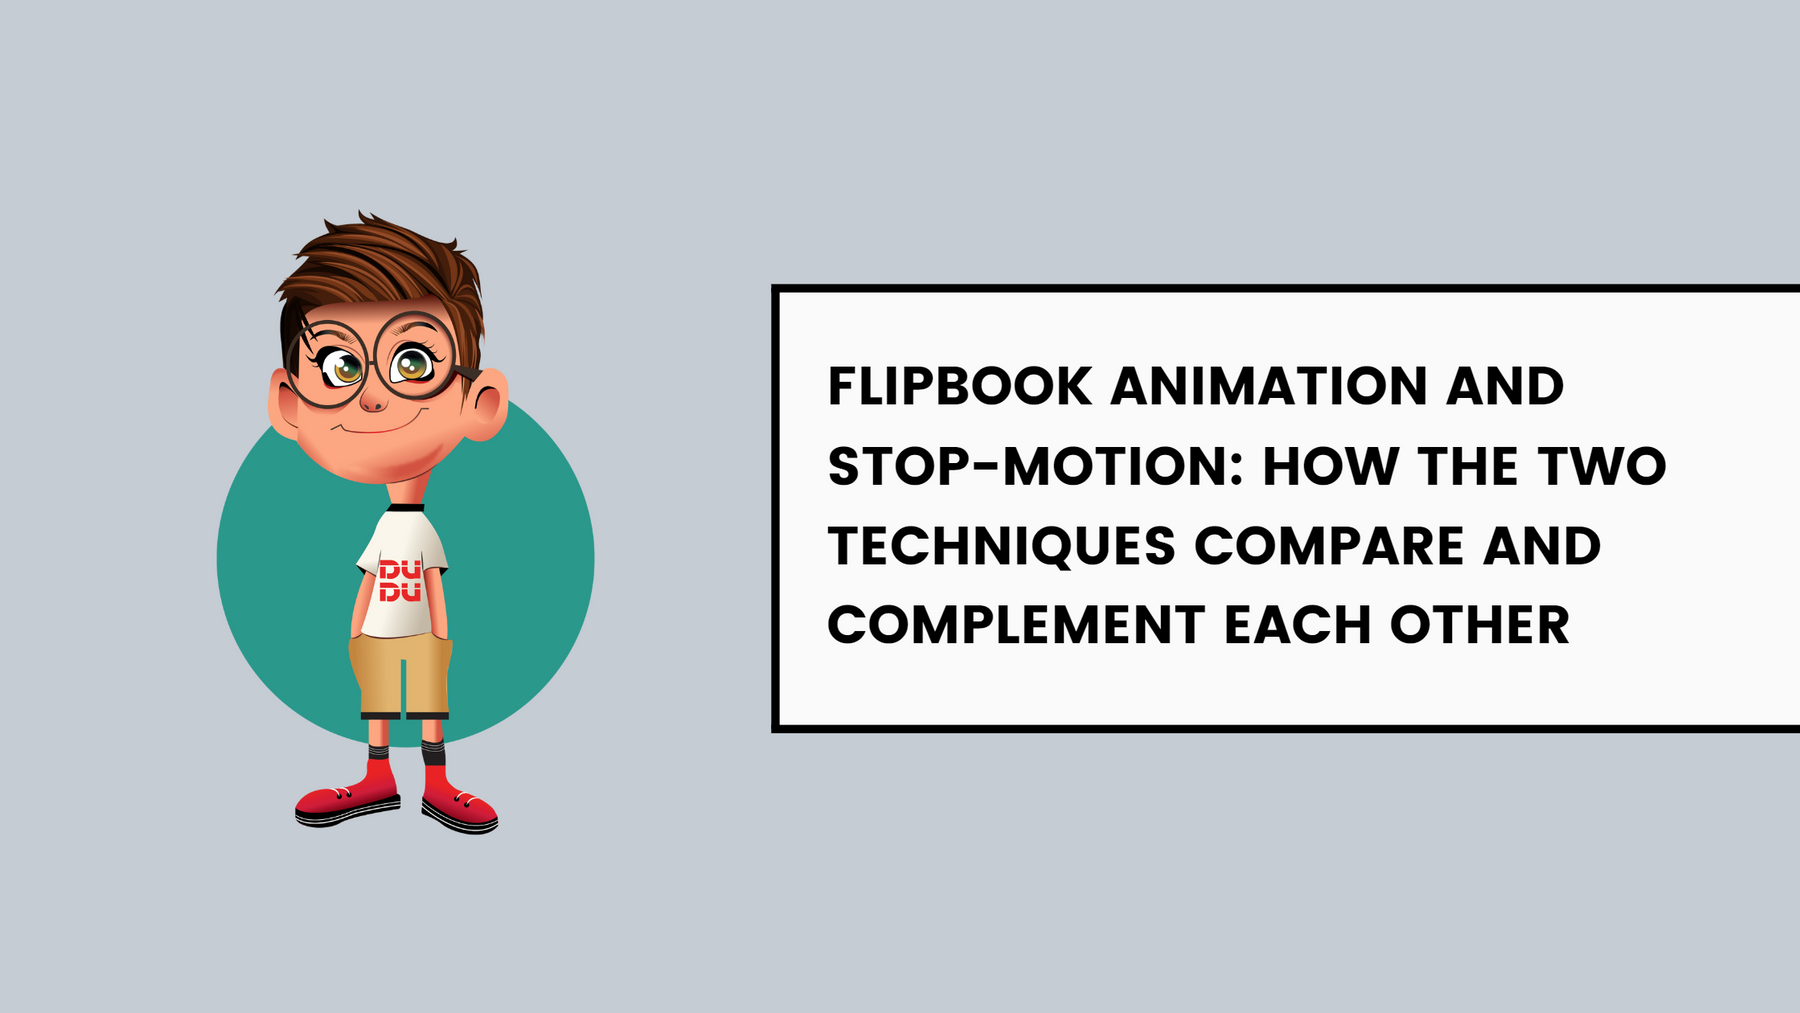 Flipbook Animation And Stop-Motion: How The Two Techniques Compare And Complement Each Other